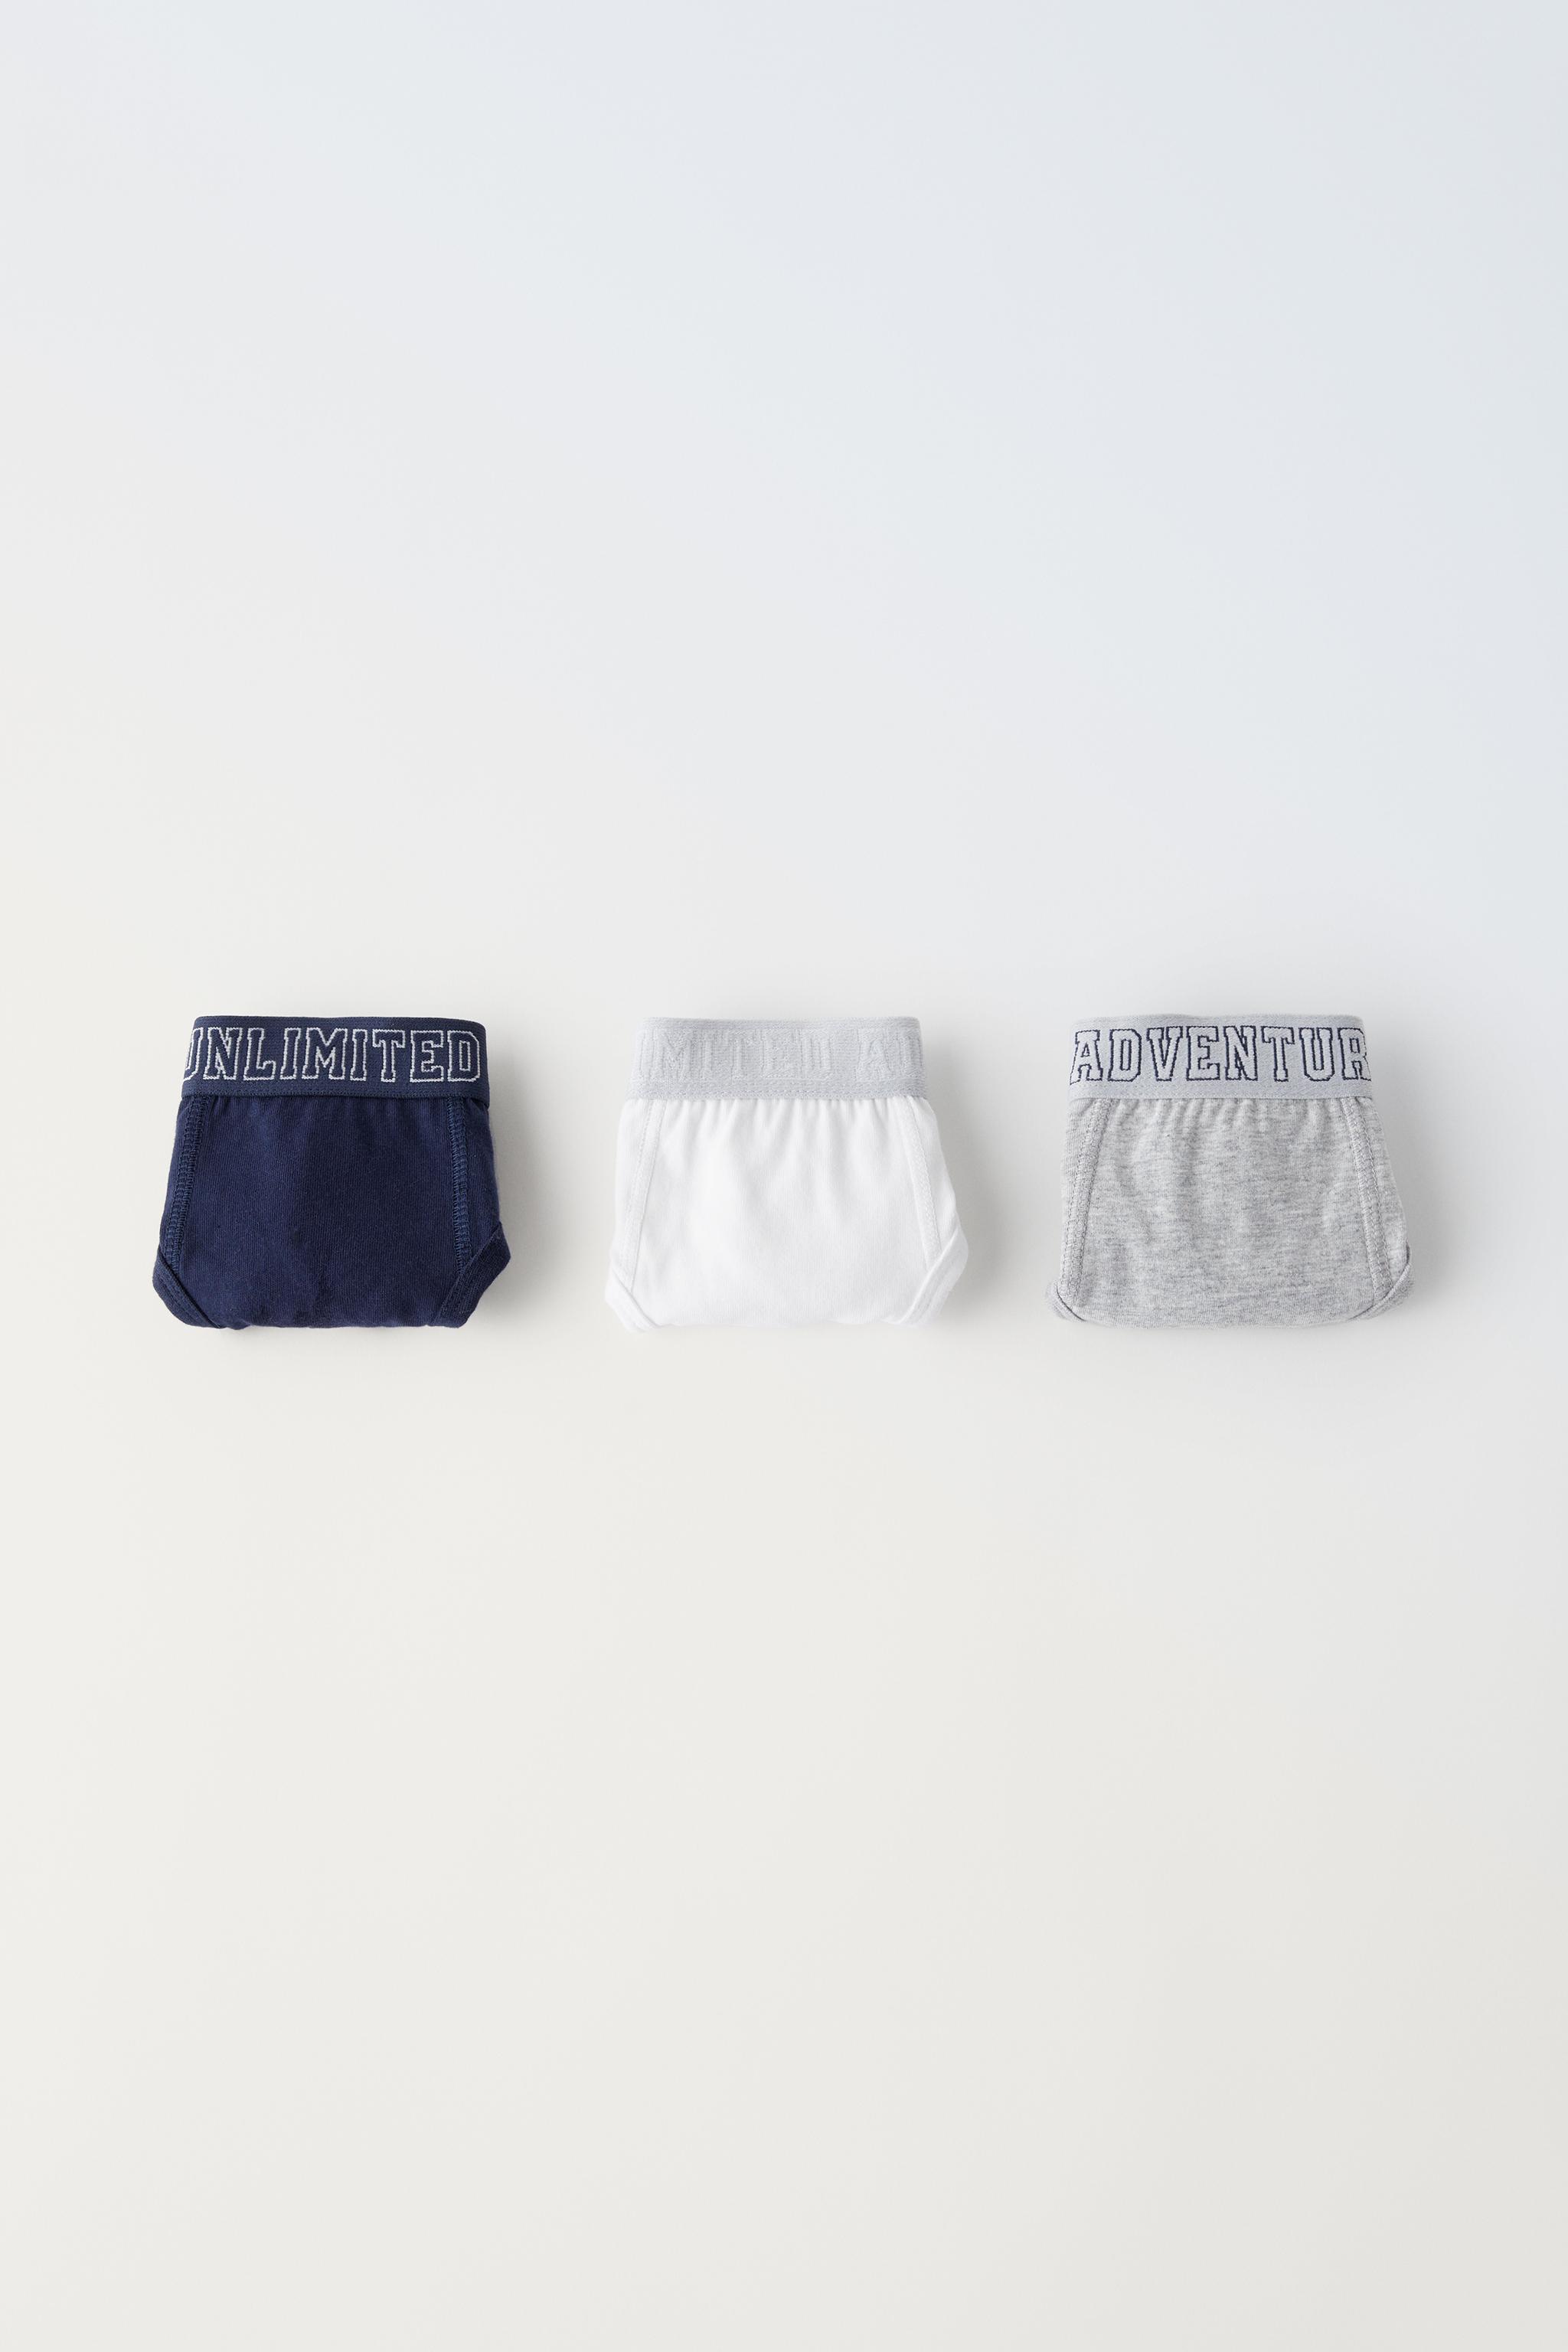 2-6 YEARS/ PACK OF 3 LABELLED BRIEFS